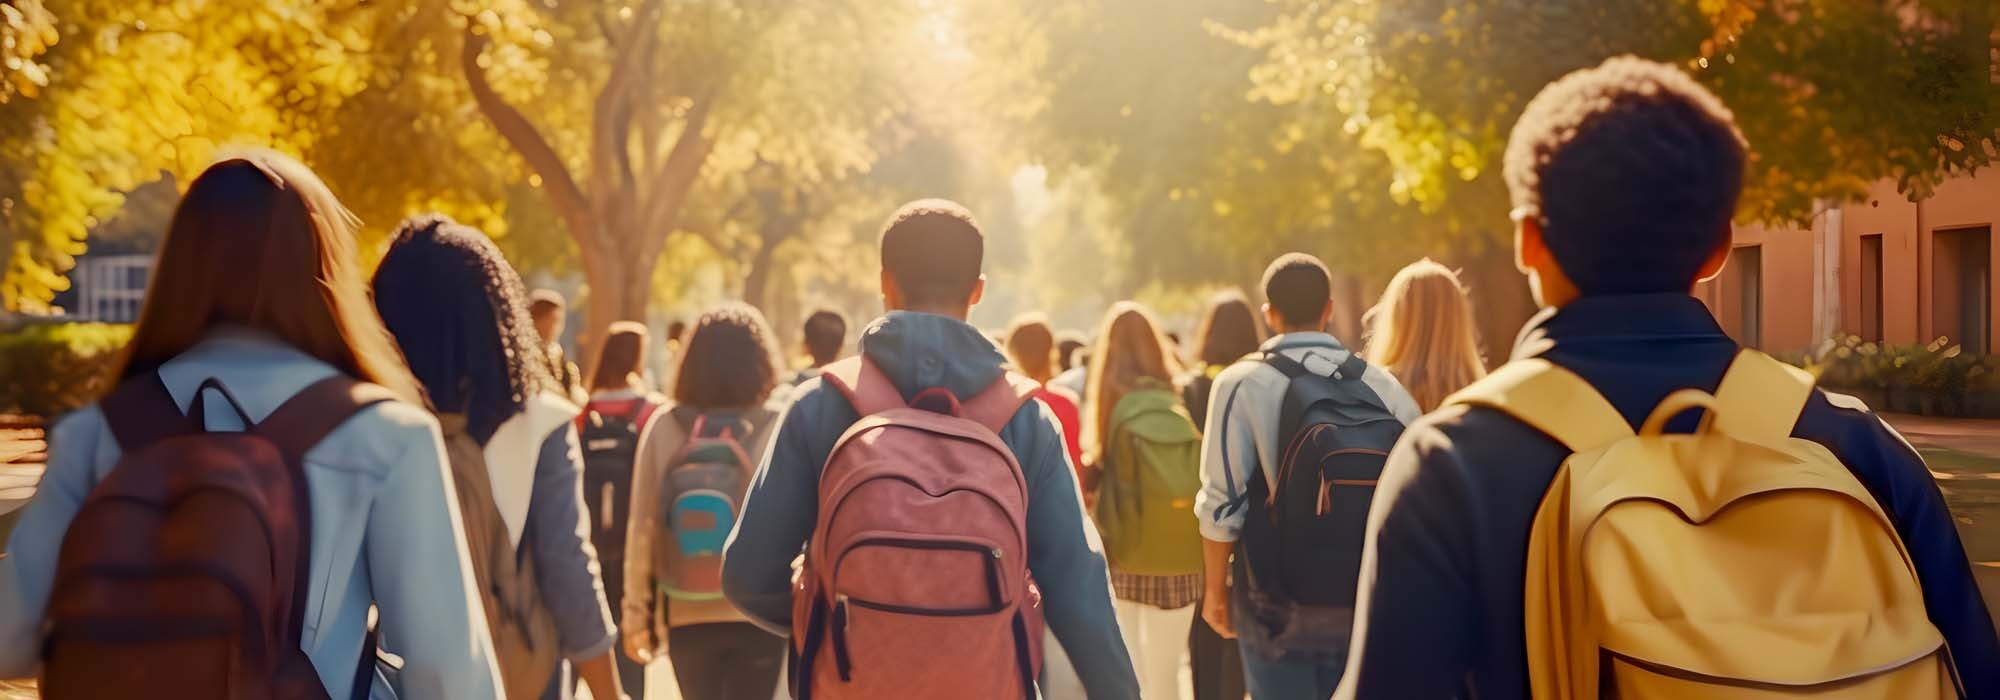 Students with backpacks walking to school